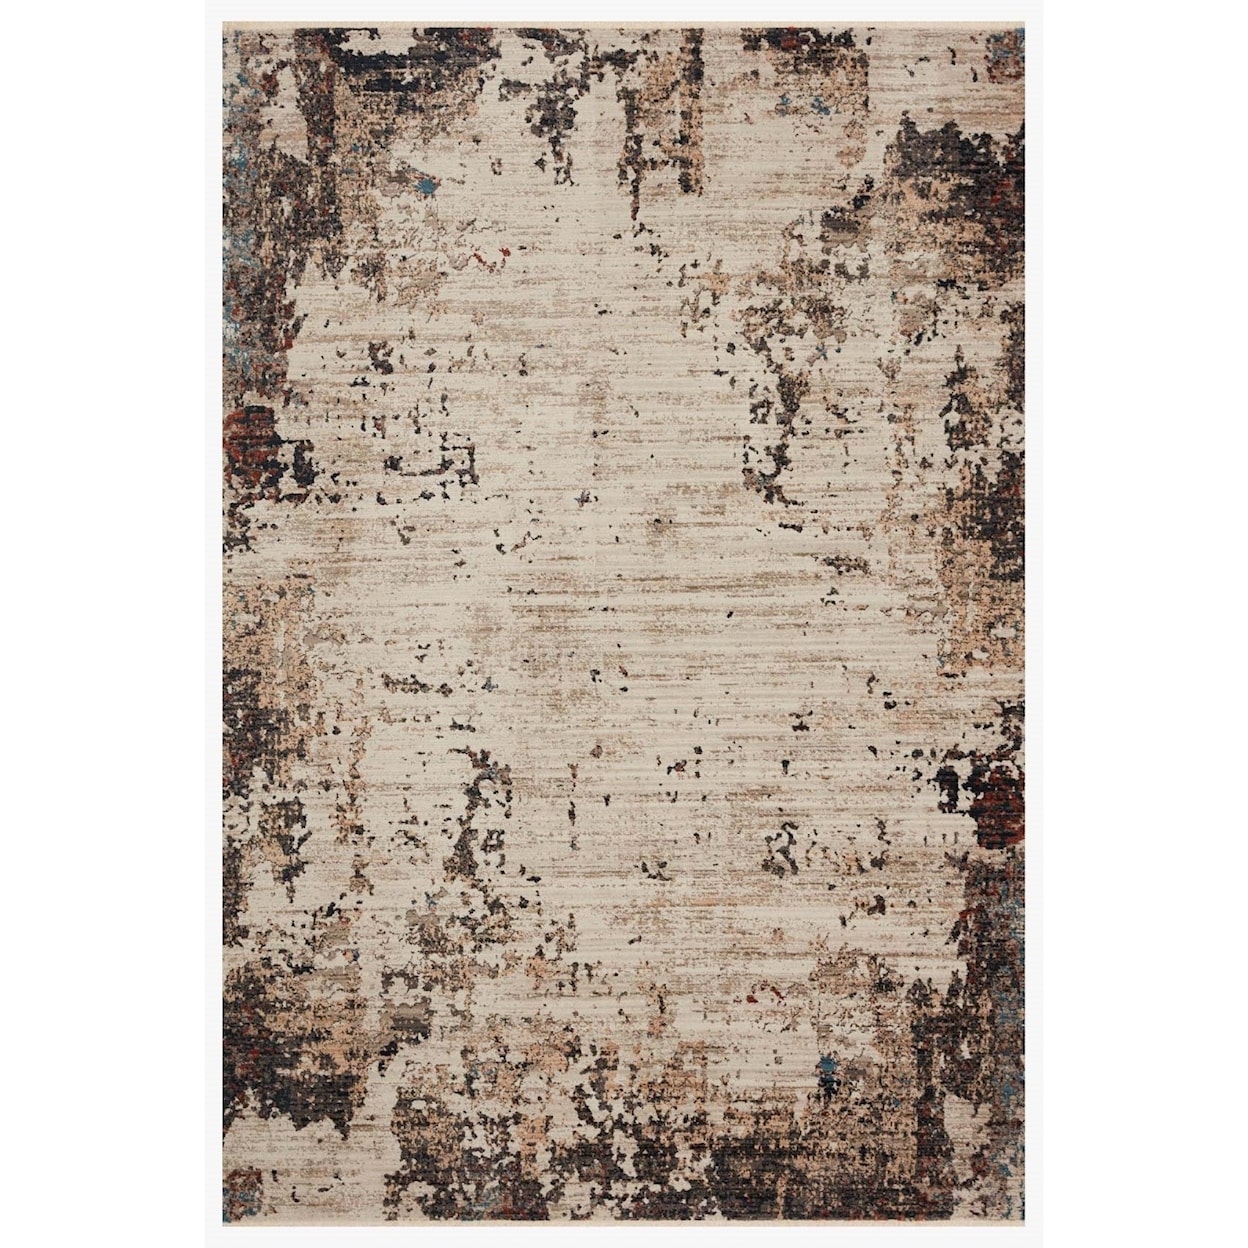 Reeds Rugs Leigh 4'0" x 5'5" Ivory / Charcoal Rug